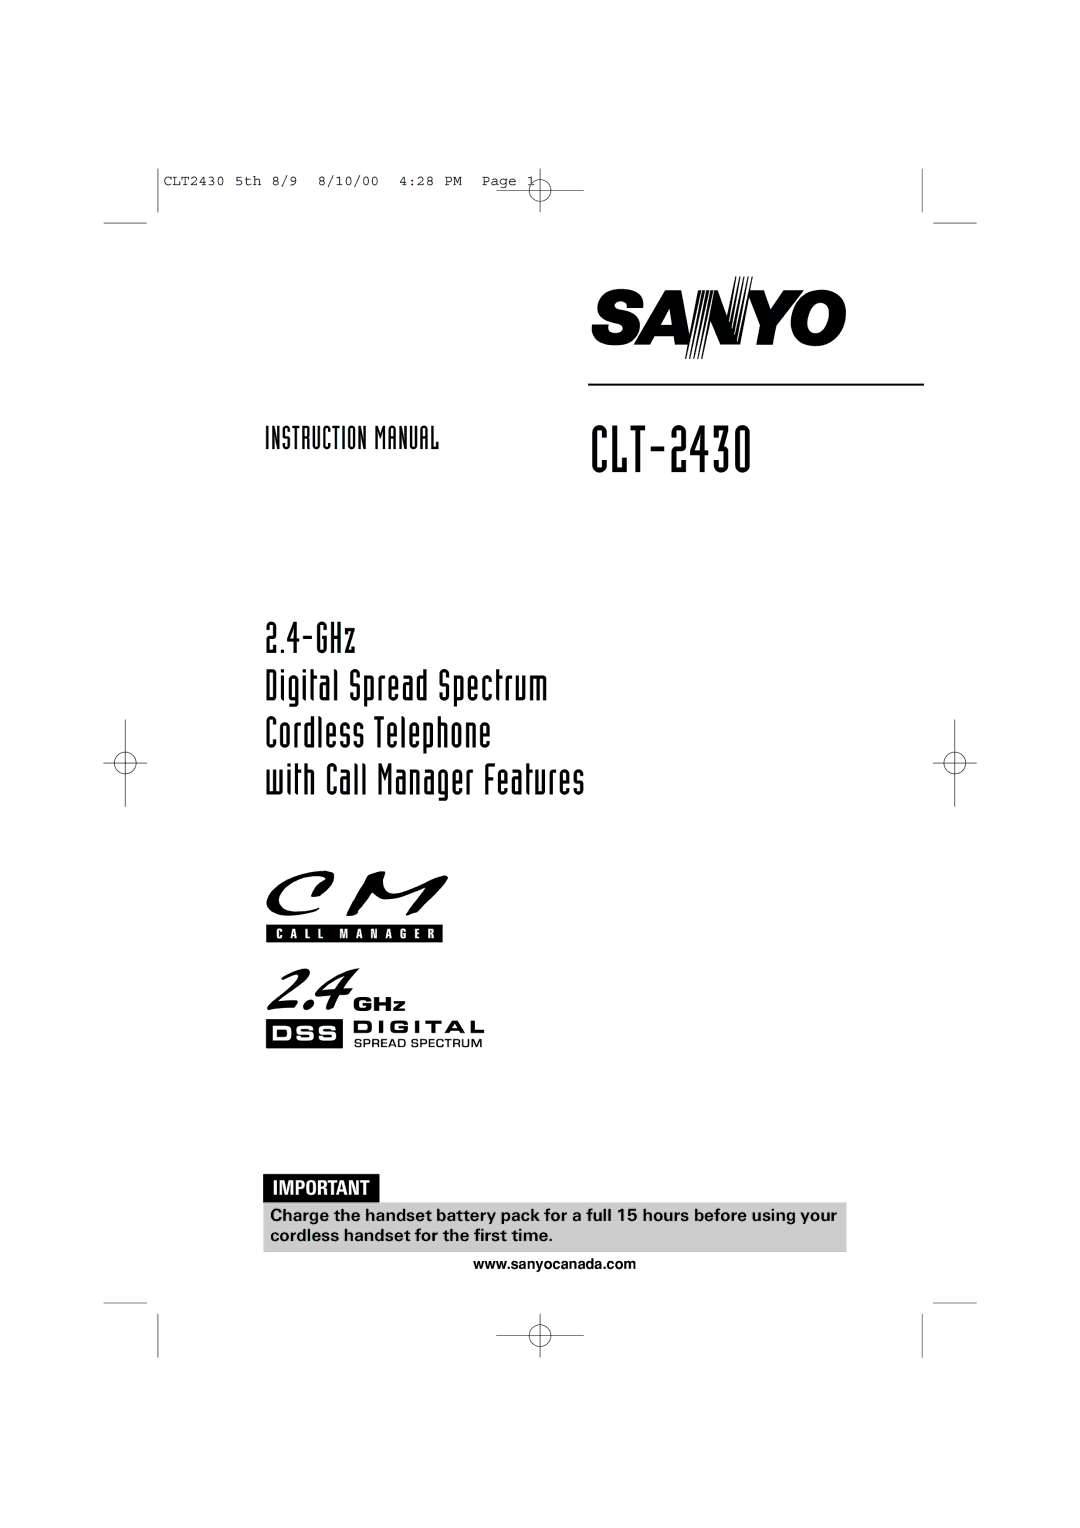 Sanyo LC-2430 instruction manual GHz 